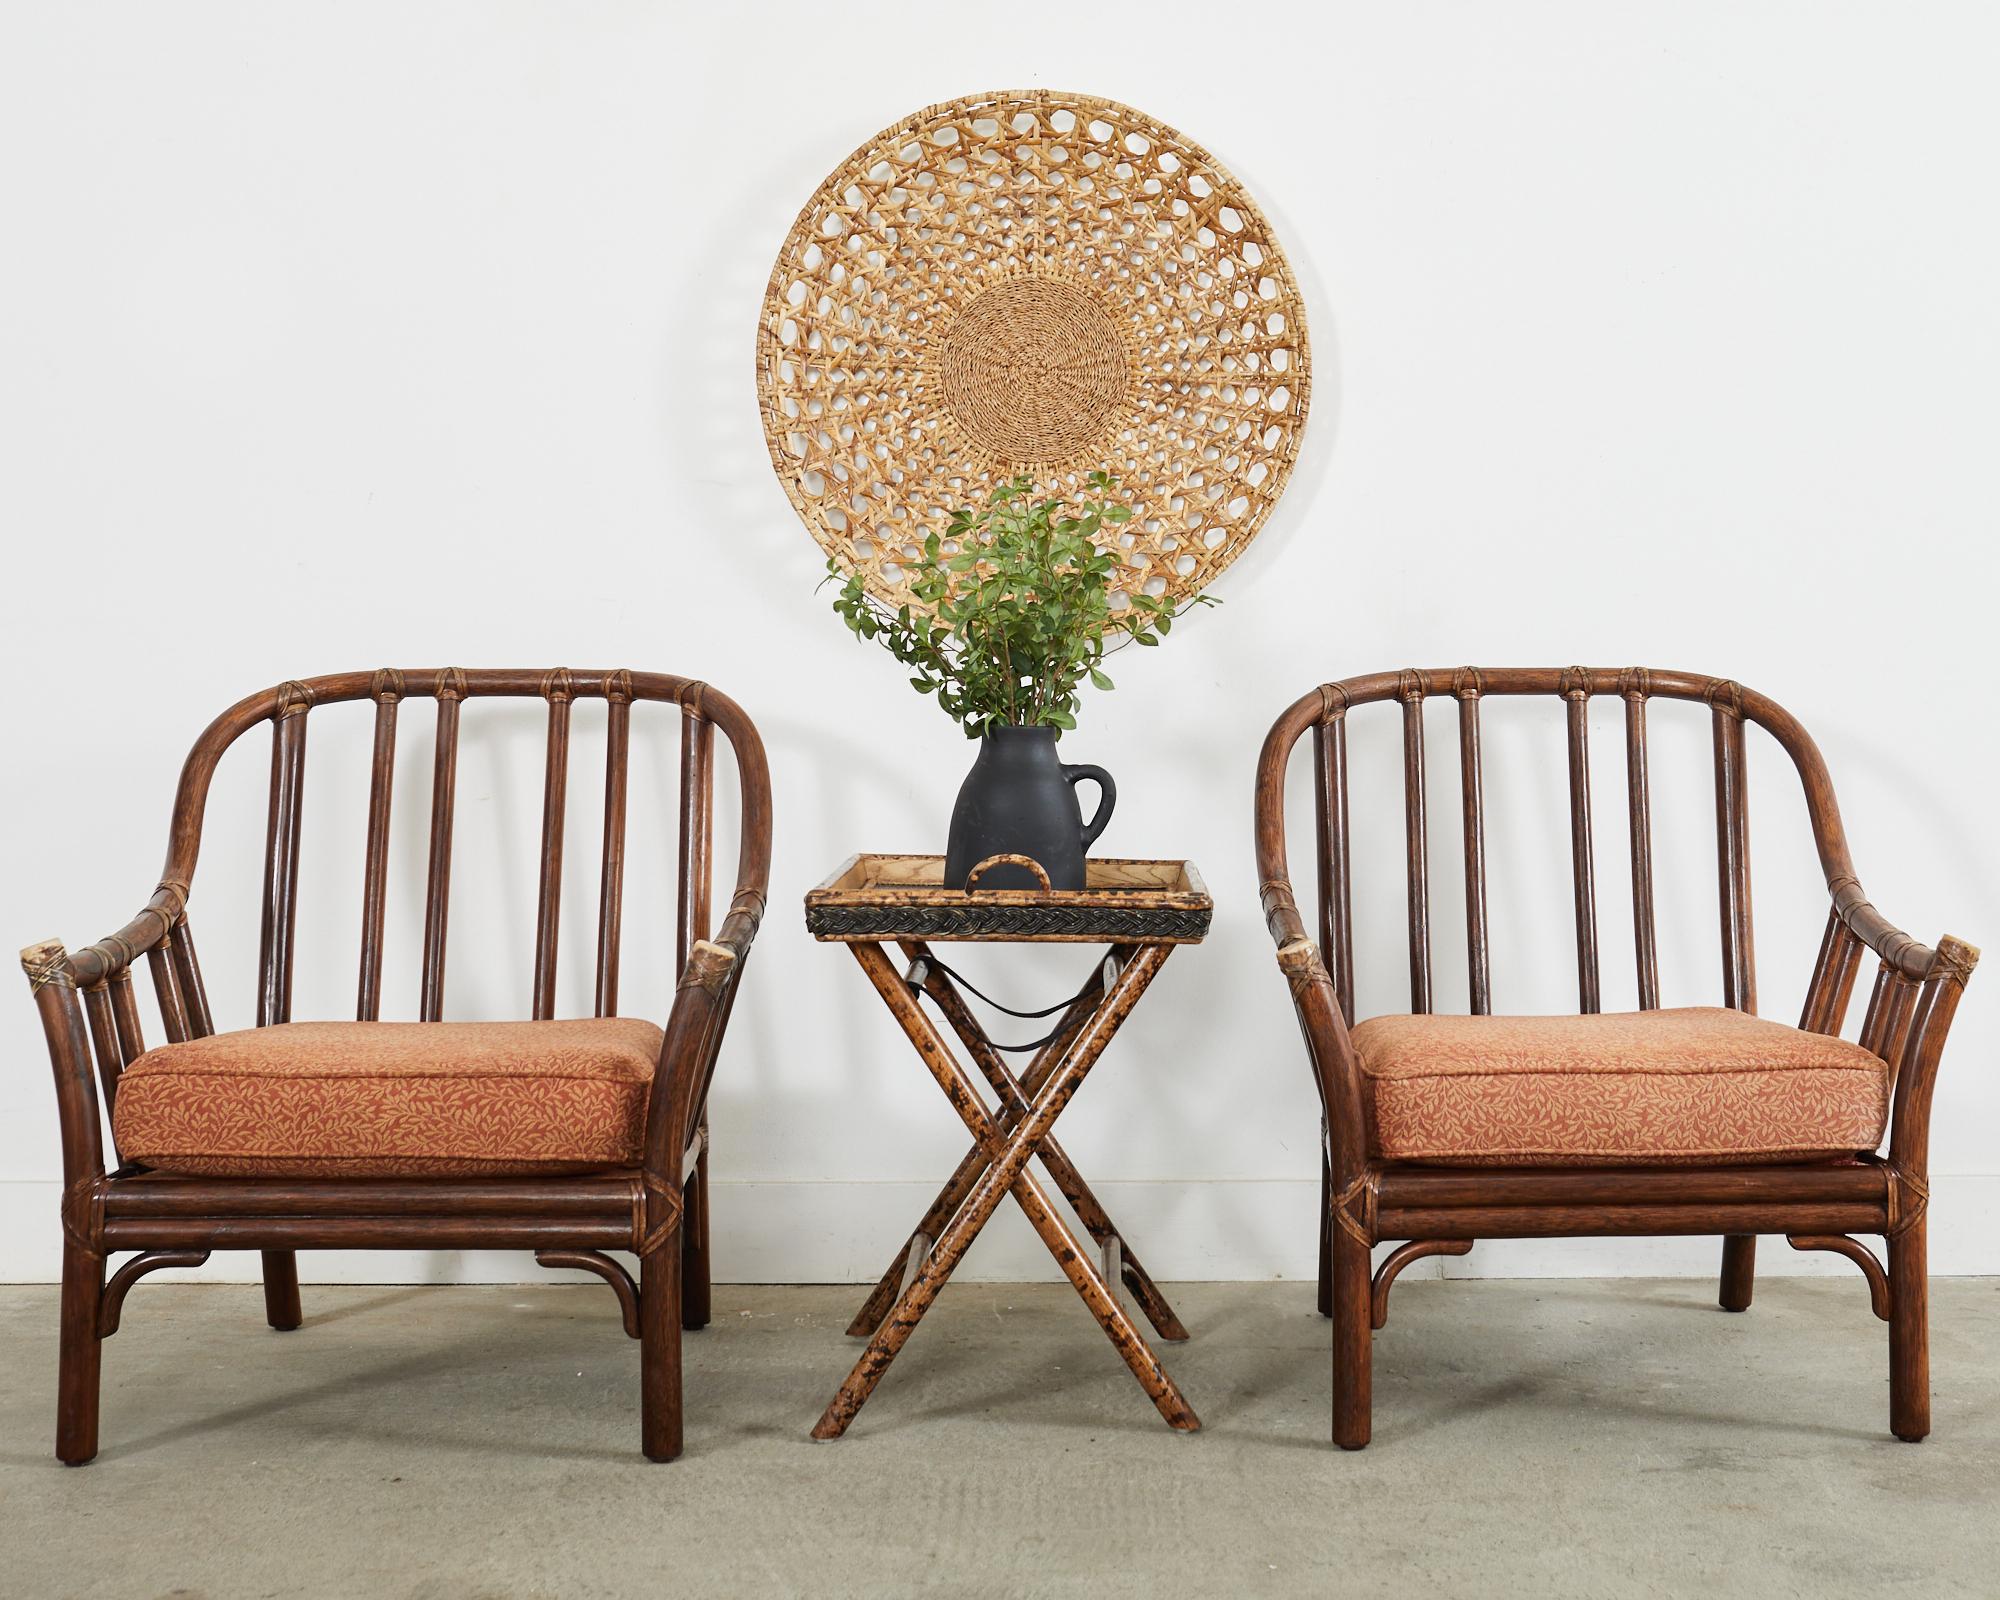 Distinctive pair of rattan lounge chairs or armchairs made in the California coastal organic modern style by McGuire. Large chairs featuring a bent pole rattan frame lashed together with leather rawhide laces and caps. The generous seats have fitted